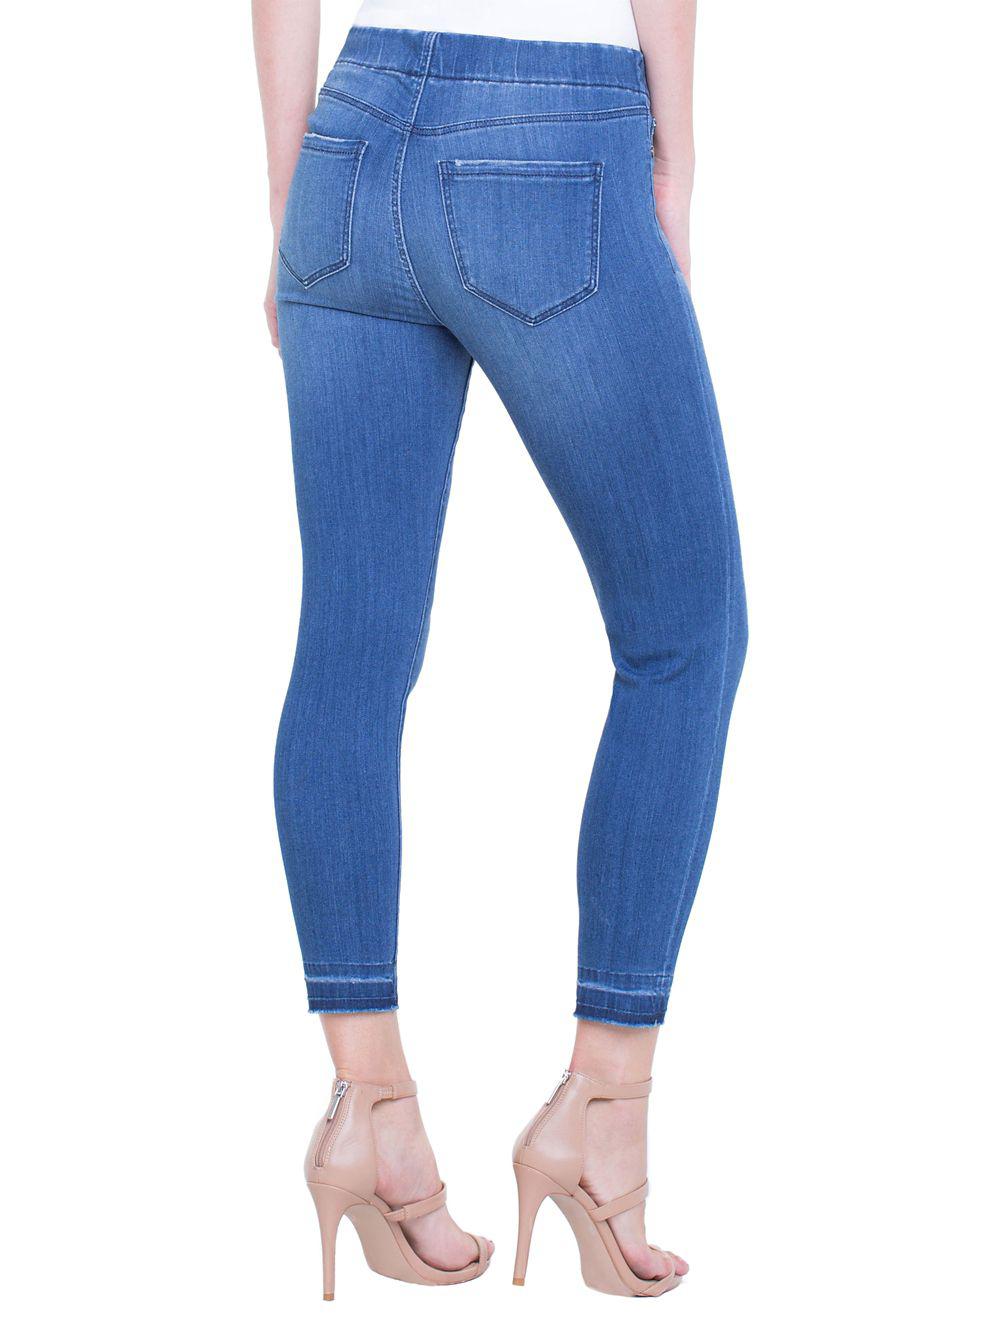 Liverpool Jeans Chloe Cropped Skinny Jeans in Blue - Lyst